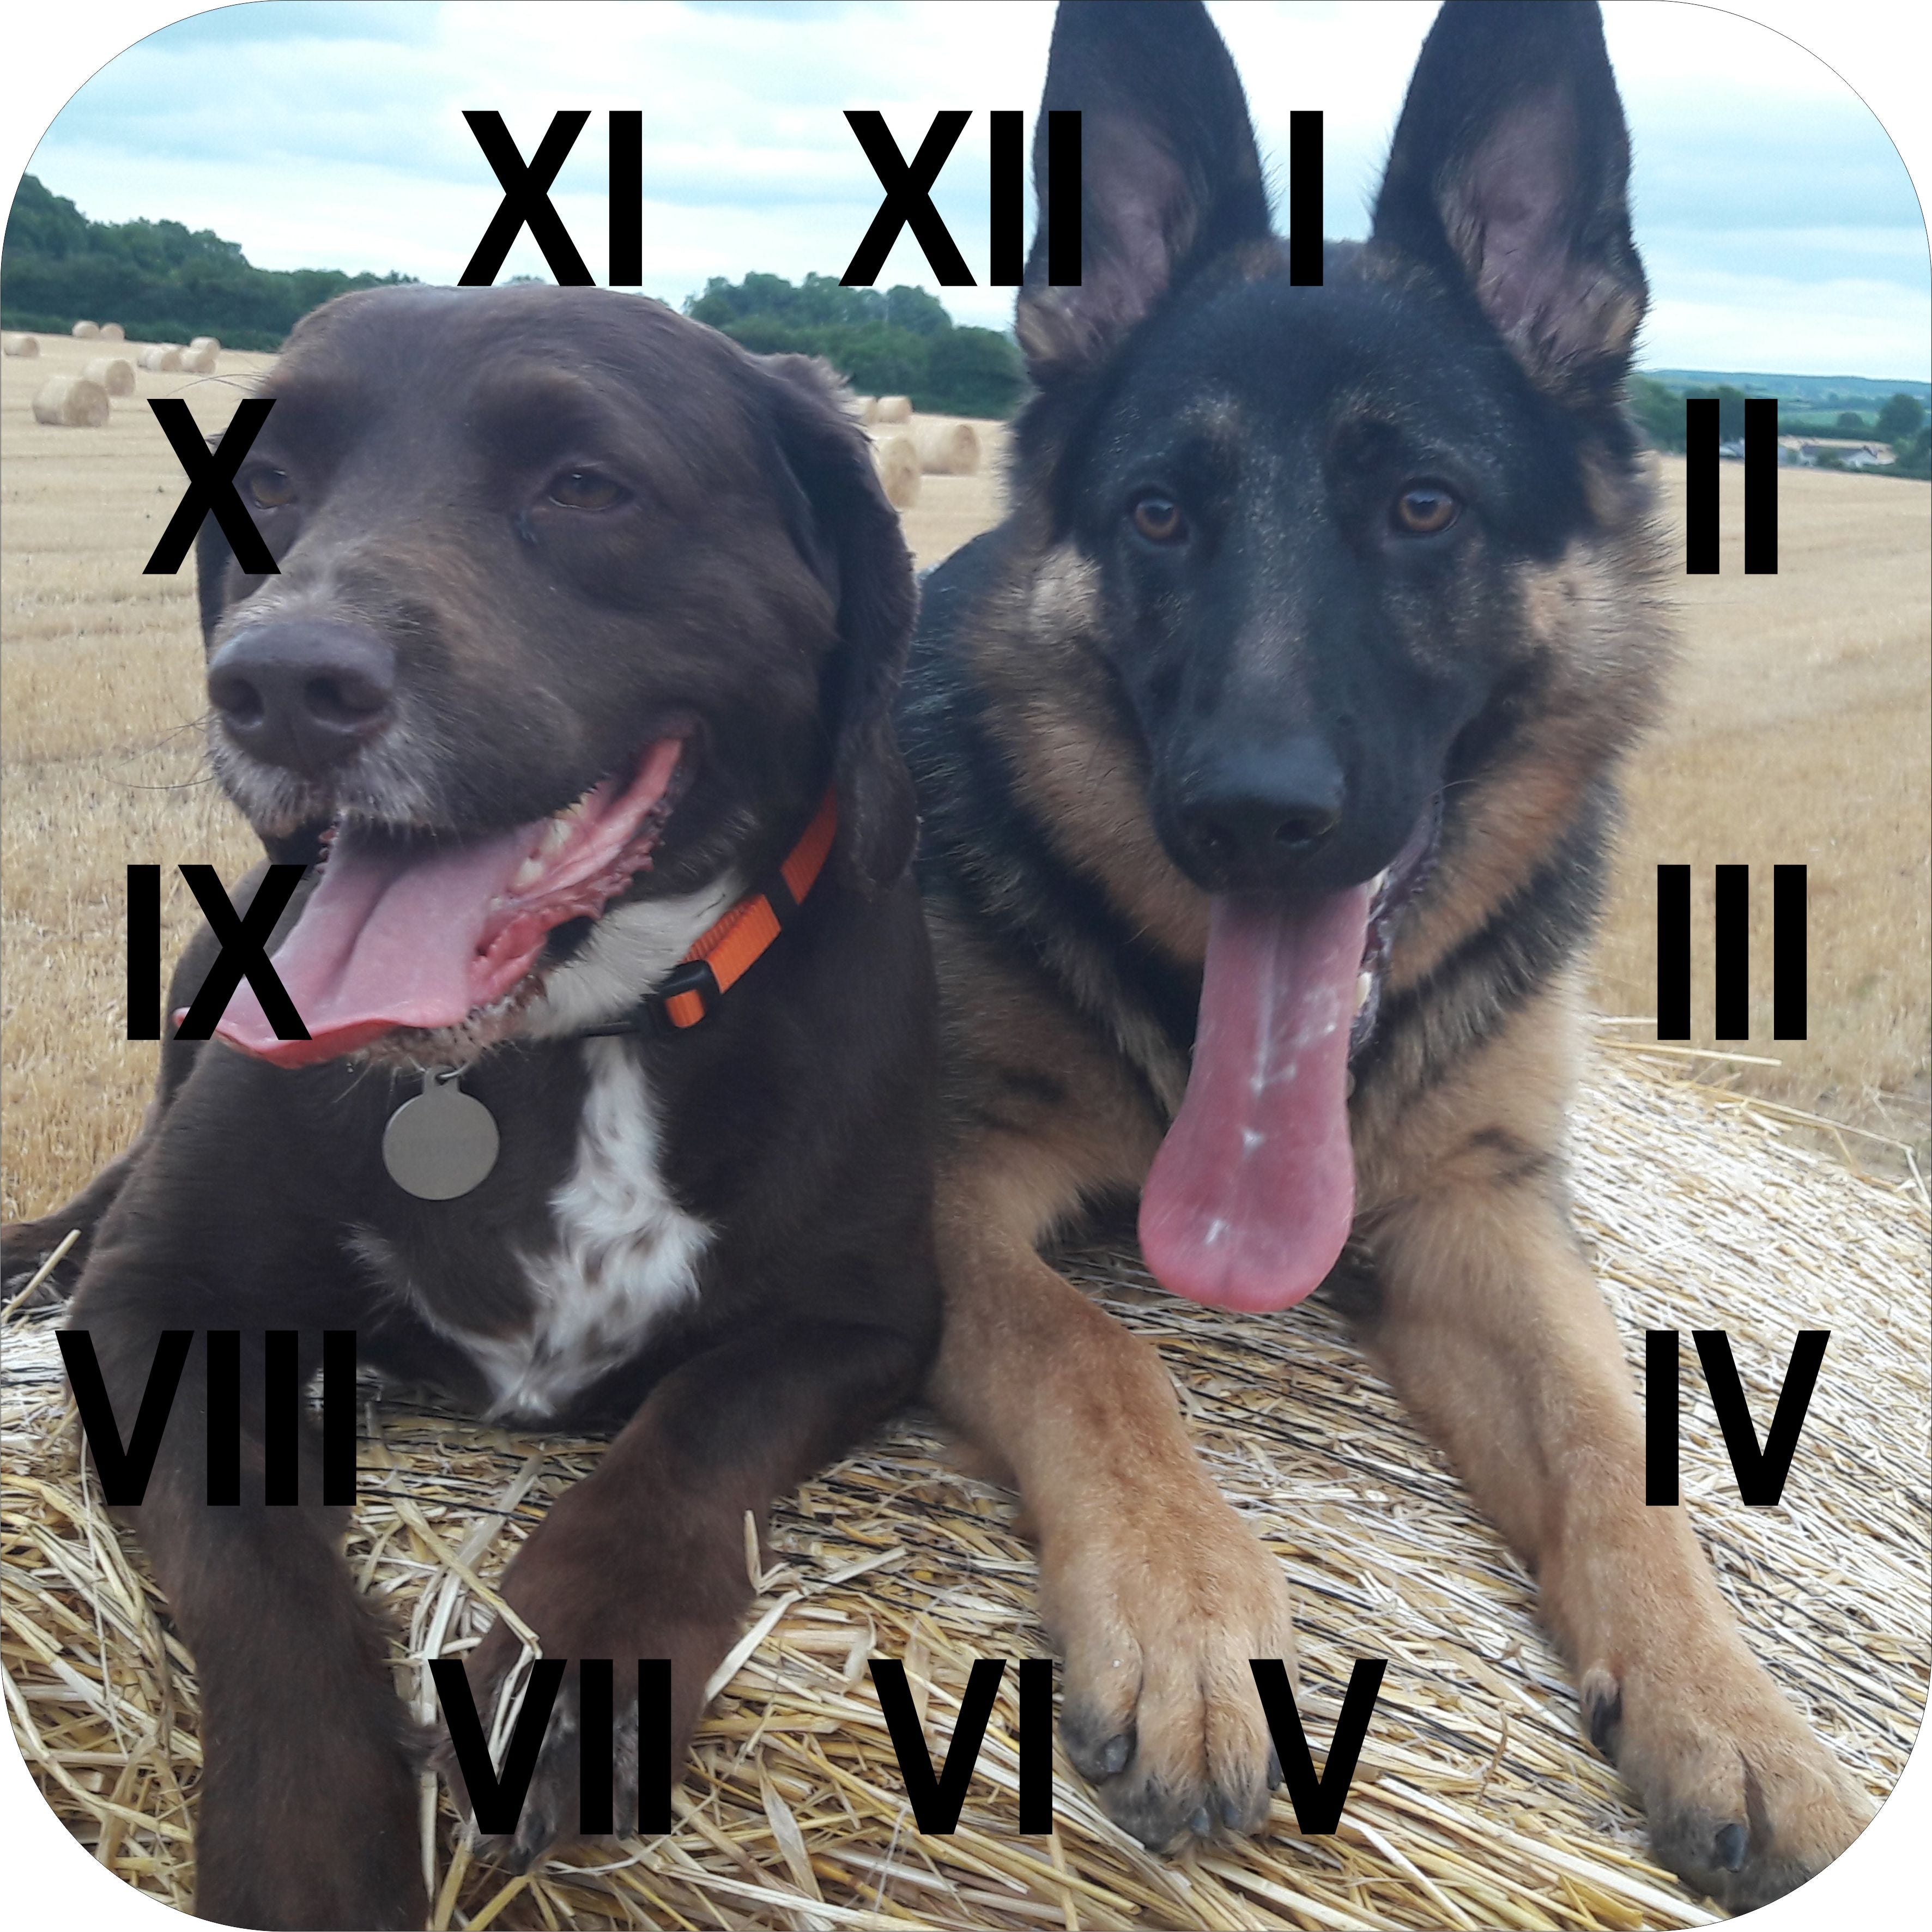 Photo Clock - Your Image Printed on the Clock - Size 30cm Square with Roman Numerals - Family, Pets, Cars - Unique Personalised Special Gift